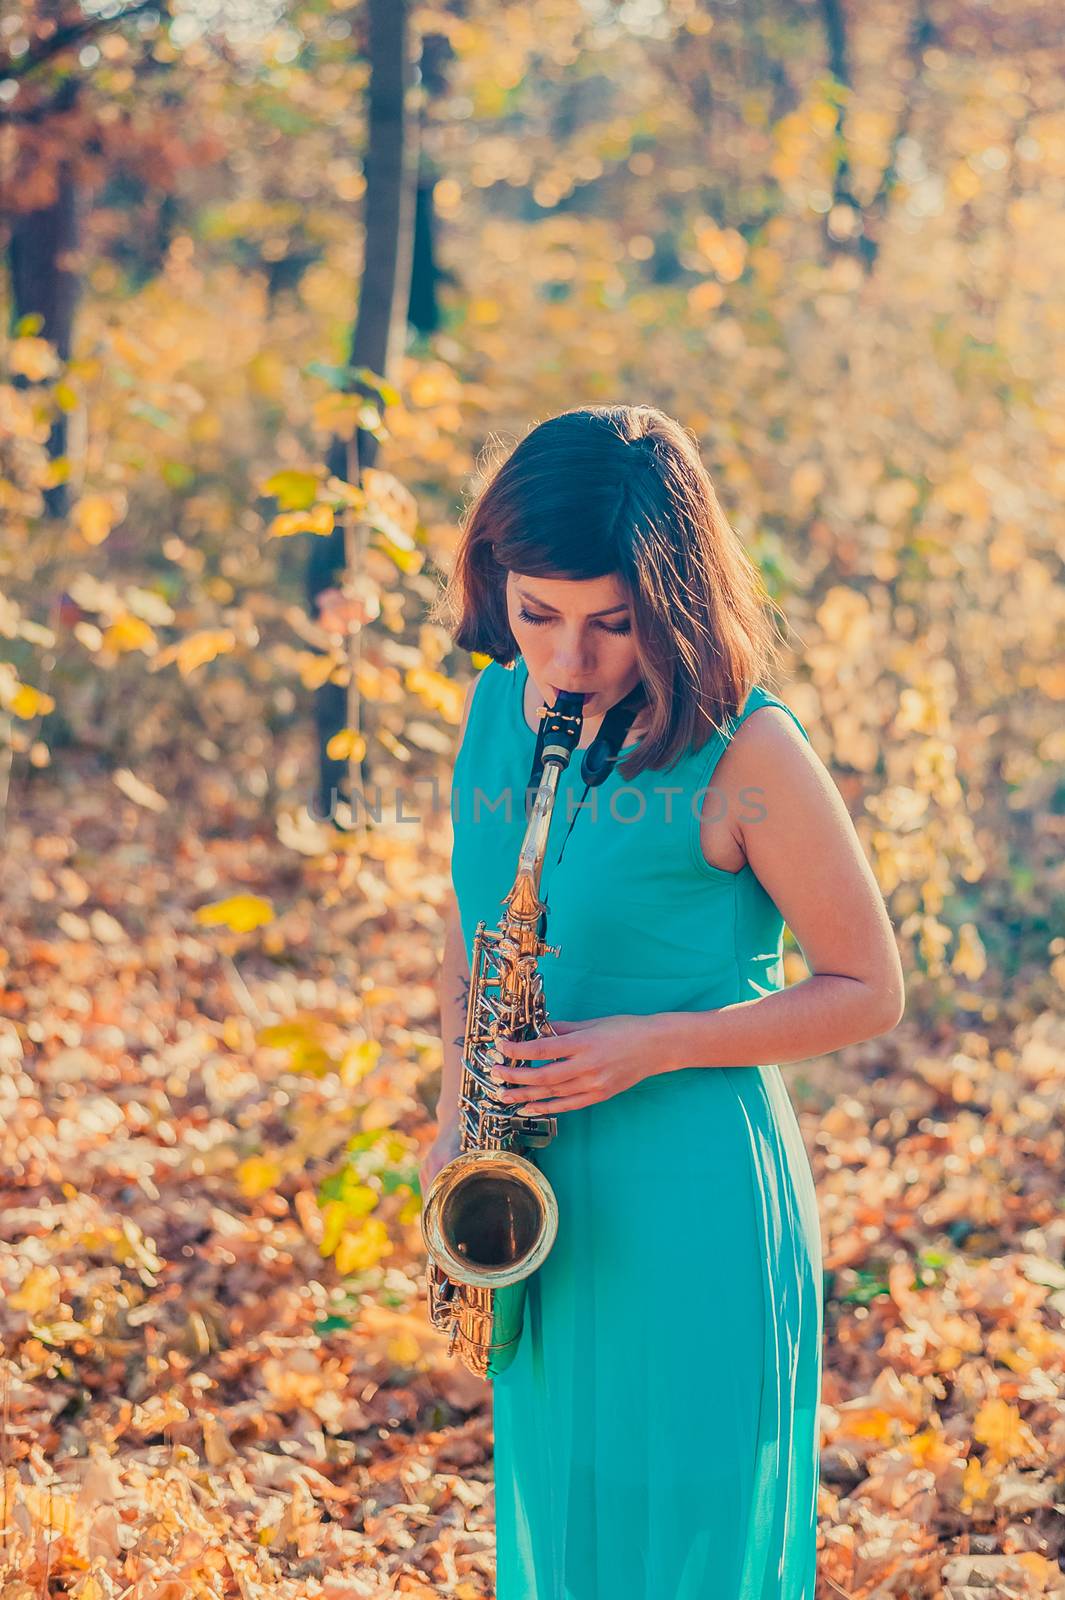 tender young girl with dark hair in a beautiful long blue dress plays the alto saxophone in a yellow autumn park